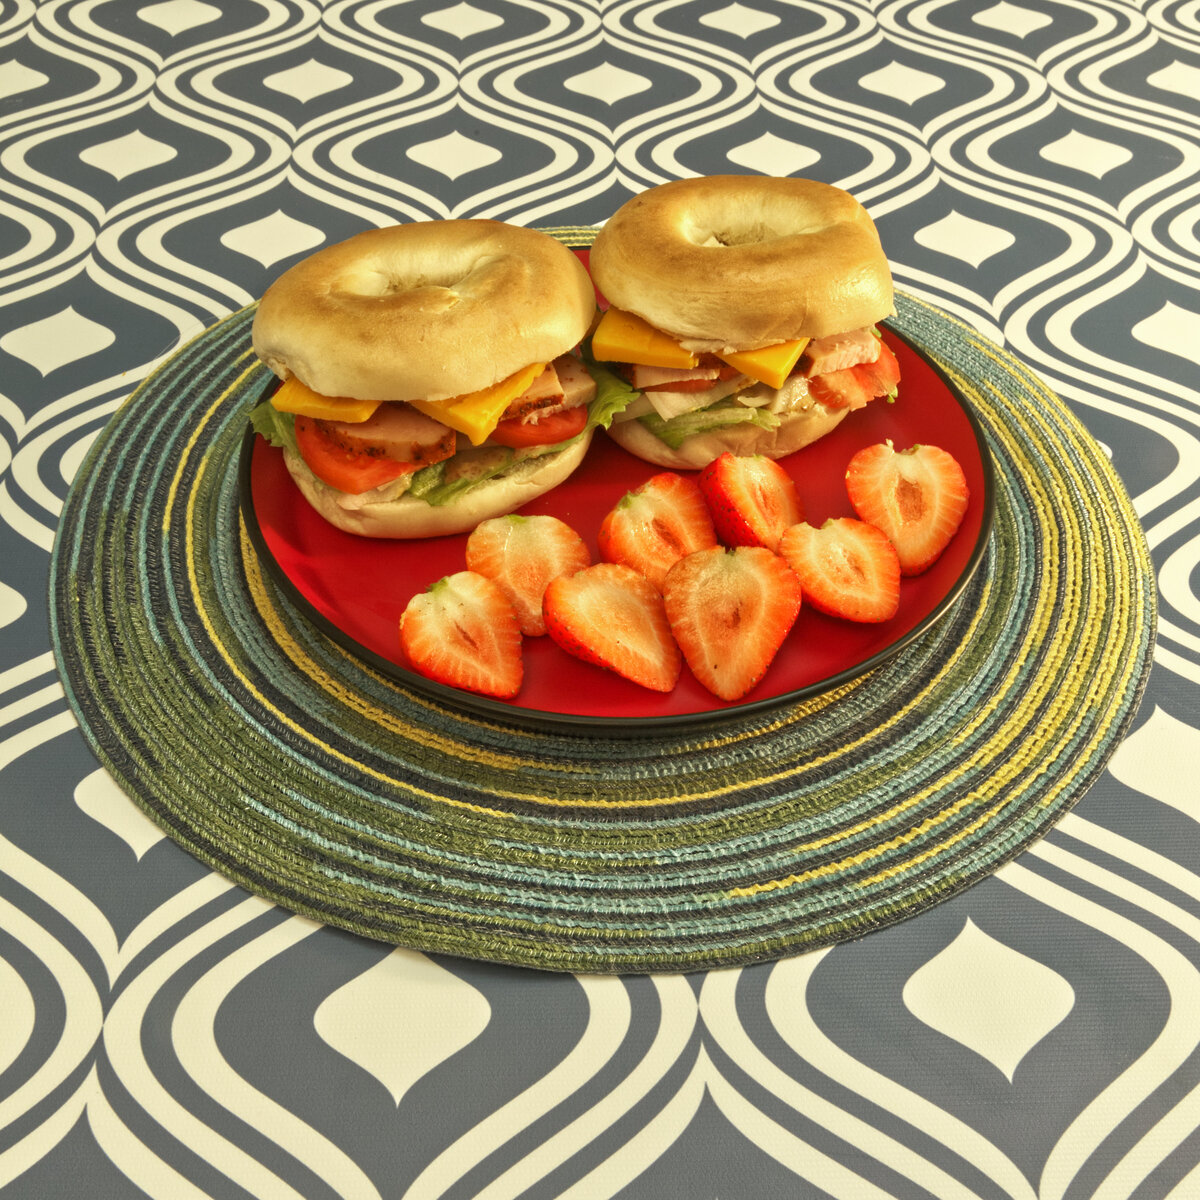 Cold Turkey and Cheddar Bagel Sandwiches with Strawberries